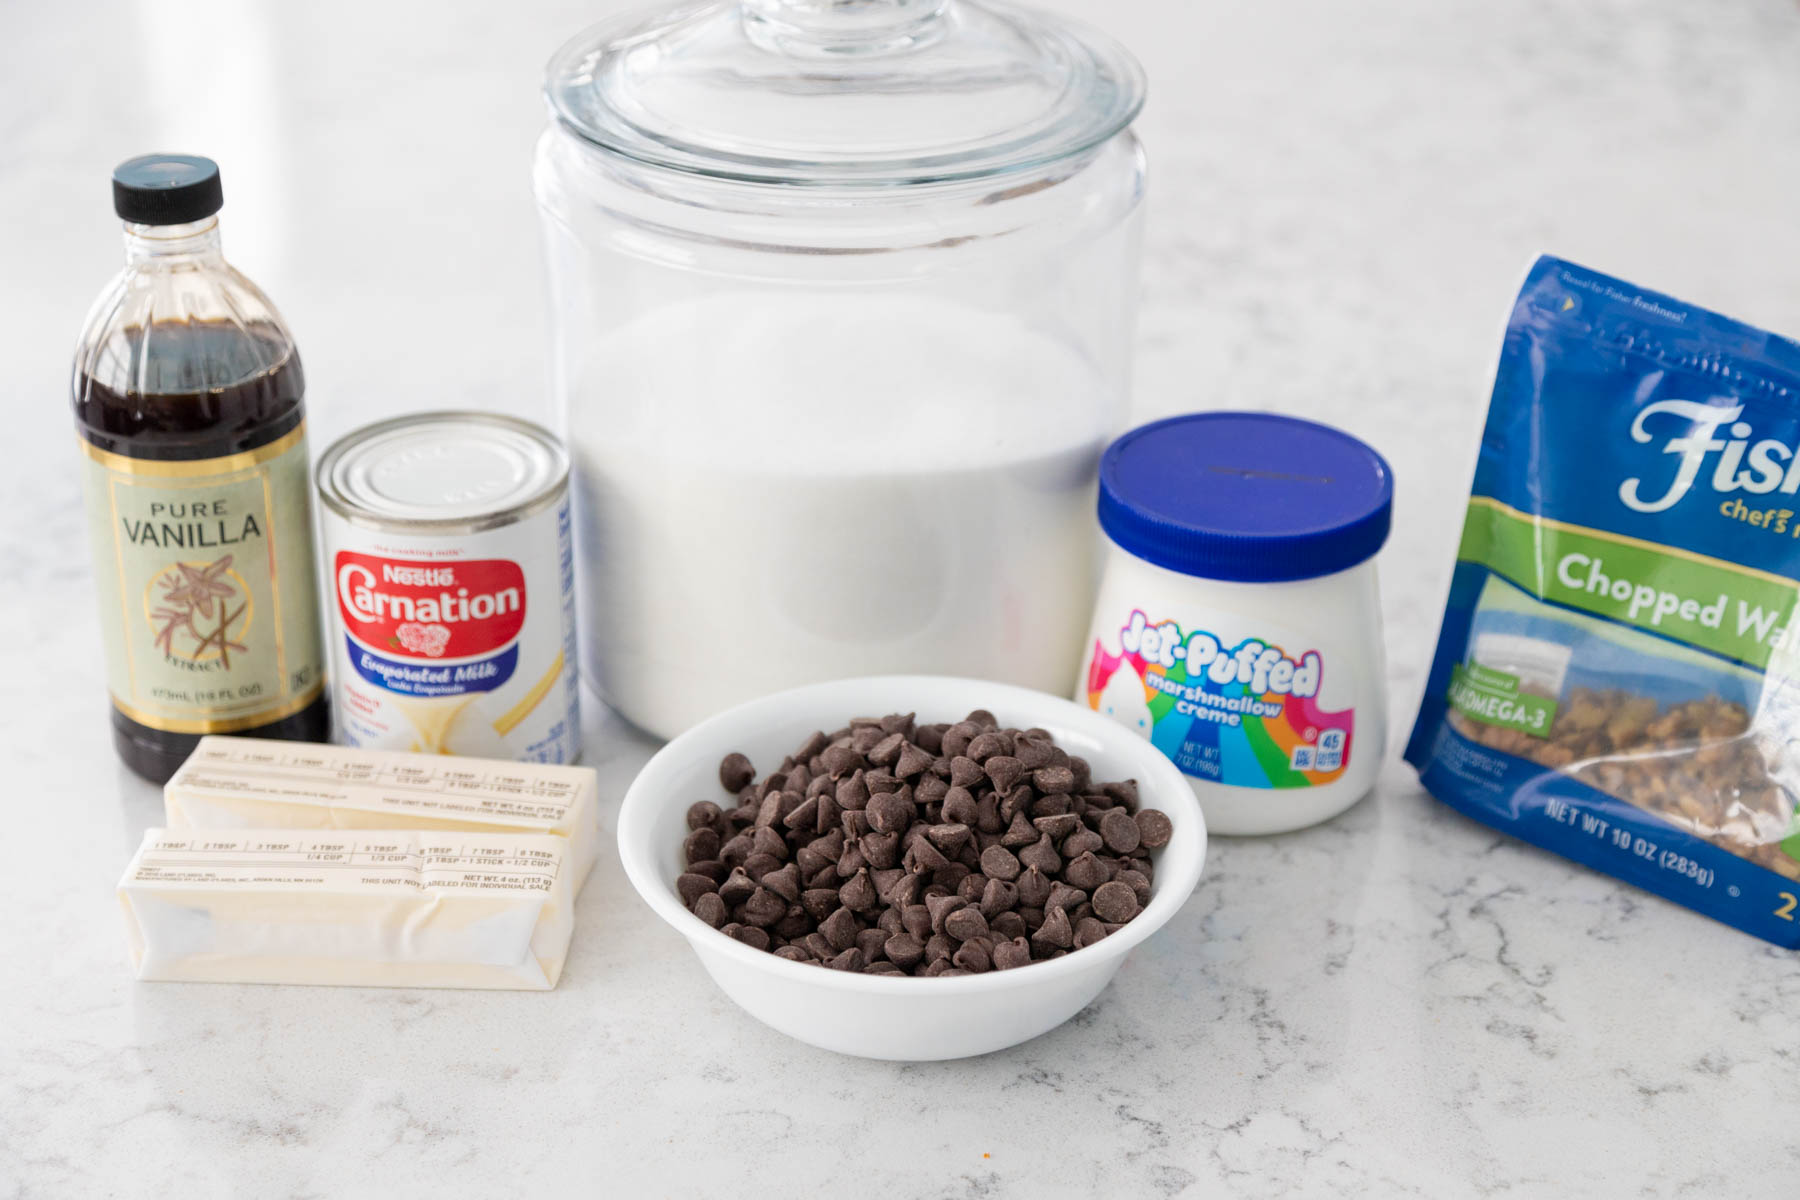 The ingredients to make the original fantasy fudge recipe are on the counter.